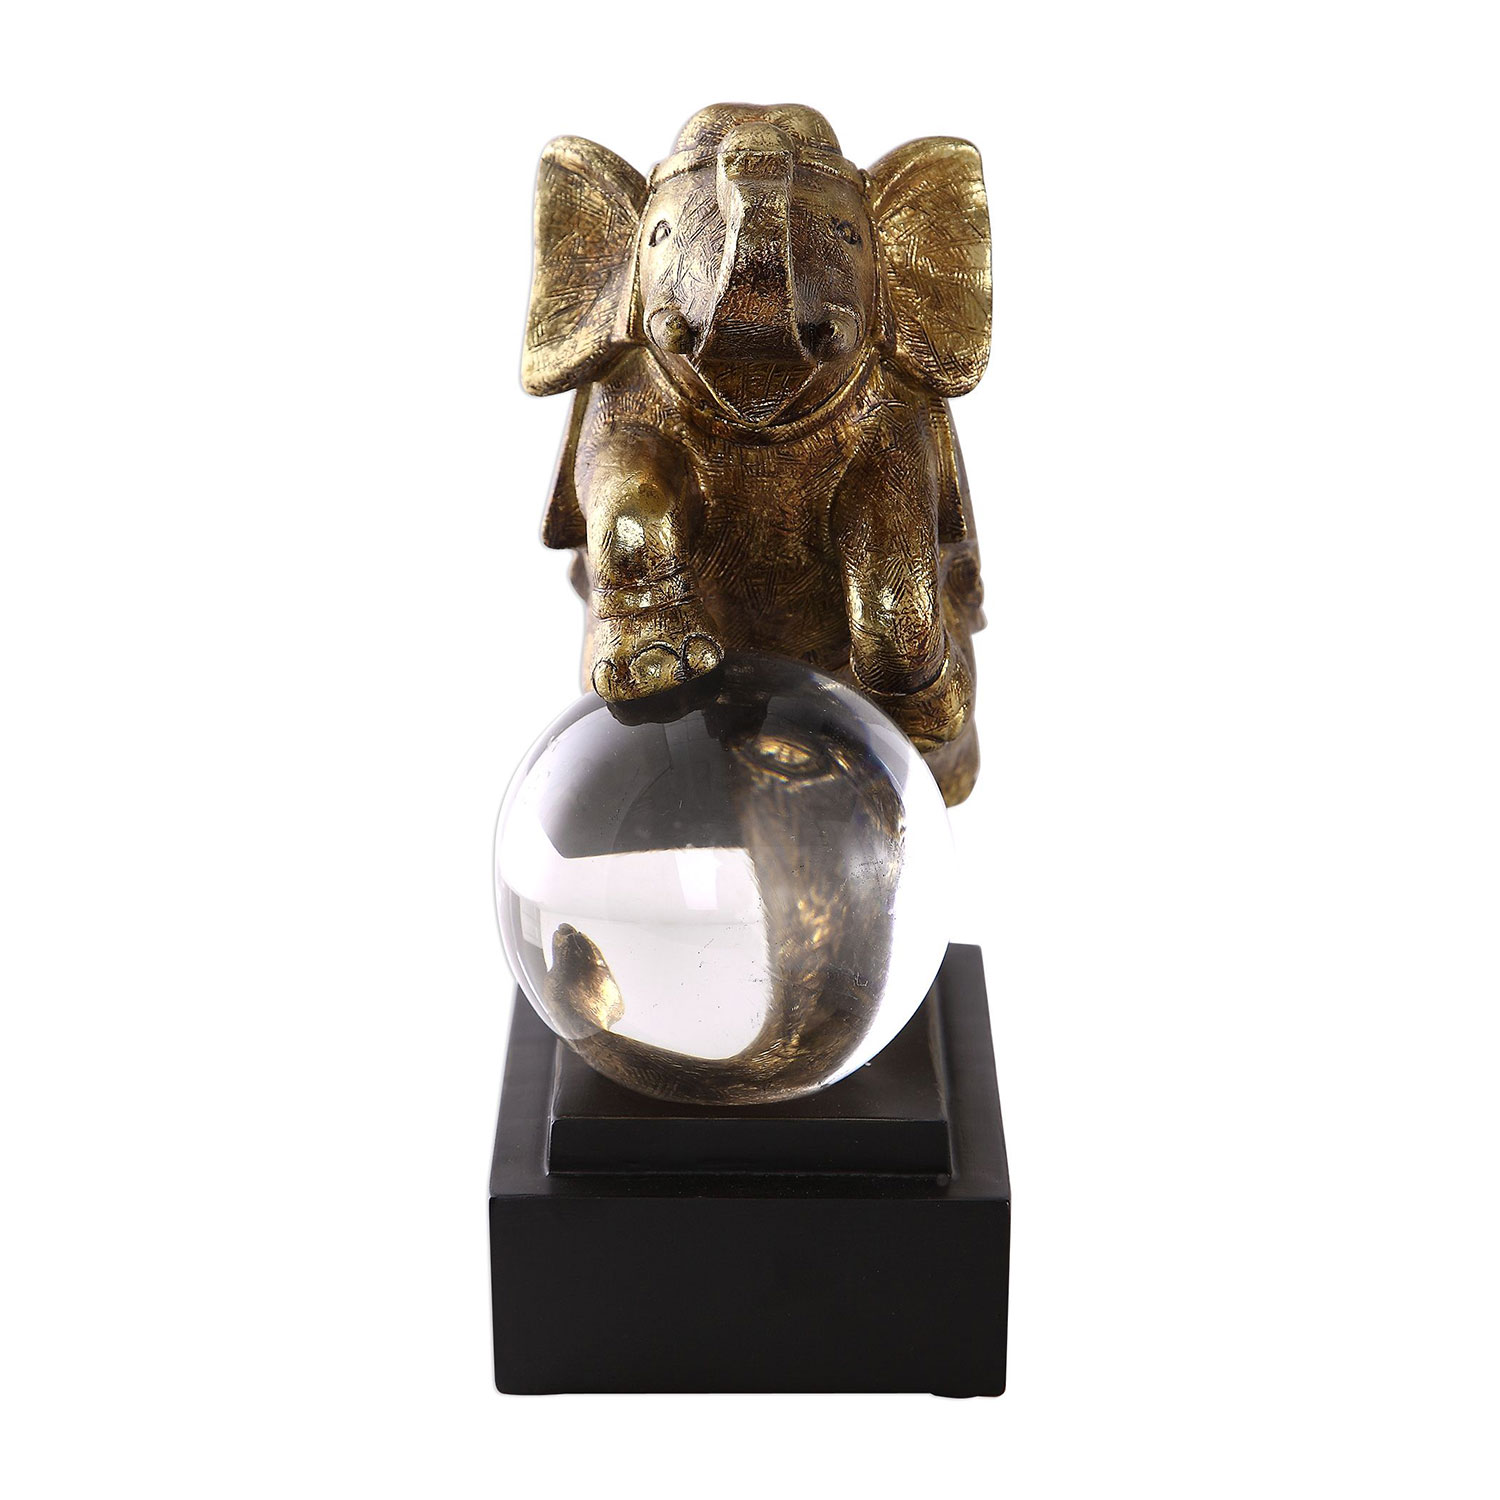 Uttermost Circus Act Elephant Bookends - Set of 2 - Gold